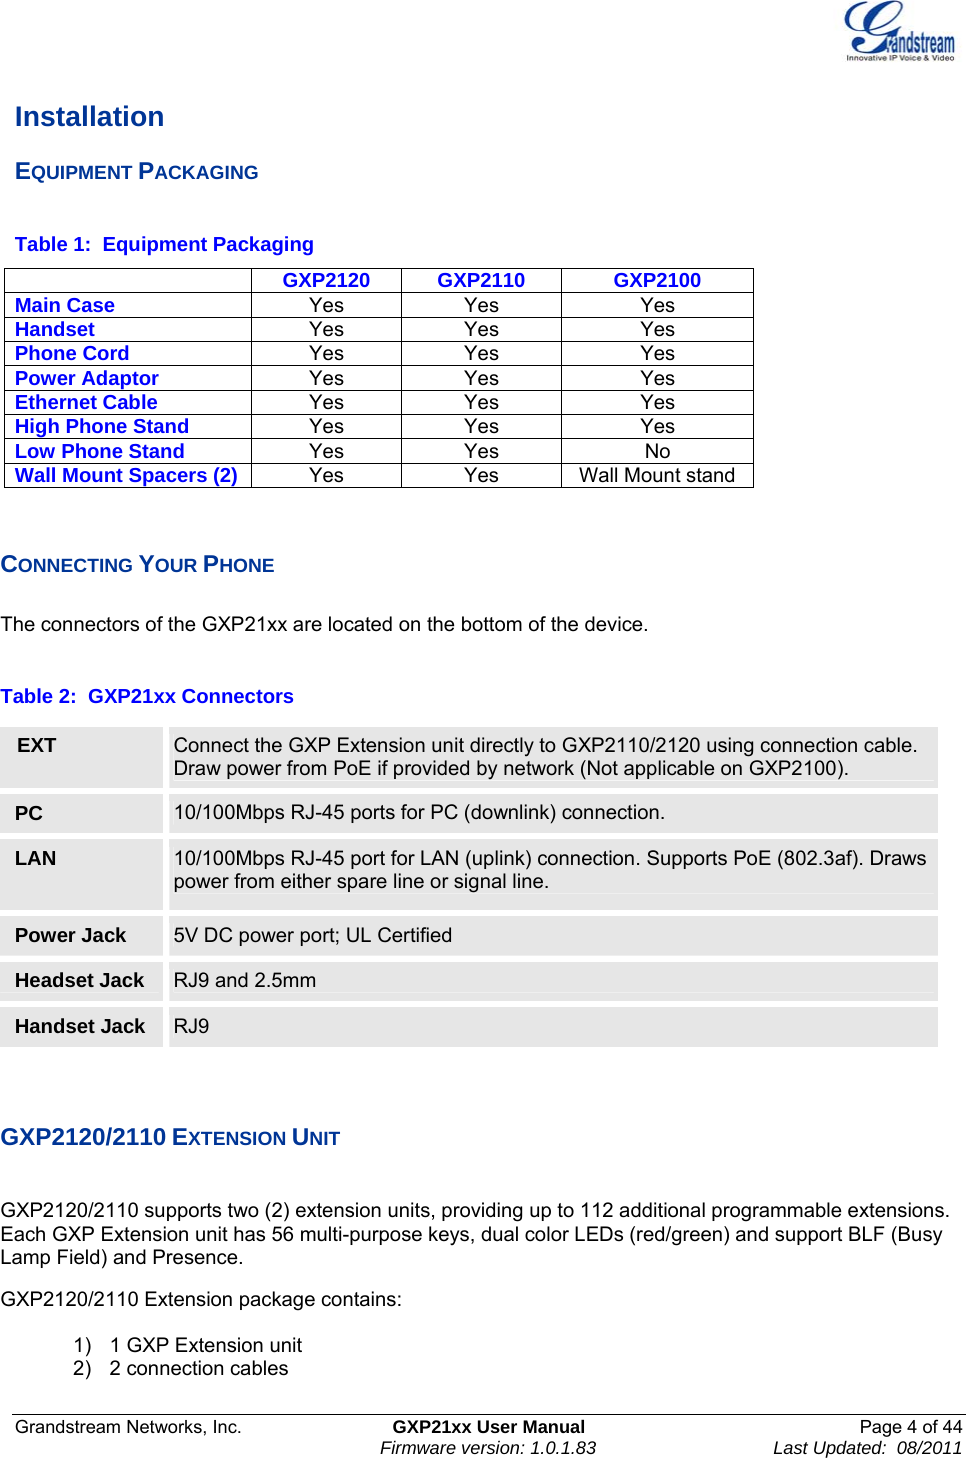  Grandstream Networks, Inc.  GXP21xx User Manual  Page 4 of 44                                                                          Firmware version: 1.0.1.83                                   Last Updated:  08/2011  Installation EQUIPMENT PACKAGING  Table 1:  Equipment Packaging GXP2120 GXP2110  GXP2100 Main Case  Yes Yes  Yes Handset  Yes Yes  Yes Phone Cord  Yes Yes  Yes Power Adaptor  Yes Yes  Yes Ethernet Cable  Yes Yes  Yes High Phone Stand  Yes Yes  Yes Low Phone Stand  Yes Yes  No Wall Mount Spacers (2) Yes  Yes  Wall Mount stand  CONNECTING YOUR PHONE  The connectors of the GXP21xx are located on the bottom of the device.   Table 2:  GXP21xx Connectors    EXT  Connect the GXP Extension unit directly to GXP2110/2120 using connection cable. Draw power from PoE if provided by network (Not applicable on GXP2100). PC  10/100Mbps RJ-45 ports for PC (downlink) connection. LAN  10/100Mbps RJ-45 port for LAN (uplink) connection. Supports PoE (802.3af). Draws power from either spare line or signal line. Power Jack  5V DC power port; UL Certified Headset Jack  RJ9 and 2.5mm Handset Jack  RJ9  GXP2120/2110 EXTENSION UNIT   GXP2120/2110 supports two (2) extension units, providing up to 112 additional programmable extensions. Each GXP Extension unit has 56 multi-purpose keys, dual color LEDs (red/green) and support BLF (Busy Lamp Field) and Presence.  GXP2120/2110 Extension package contains:  1)  1 GXP Extension unit 2) 2 connection cables  